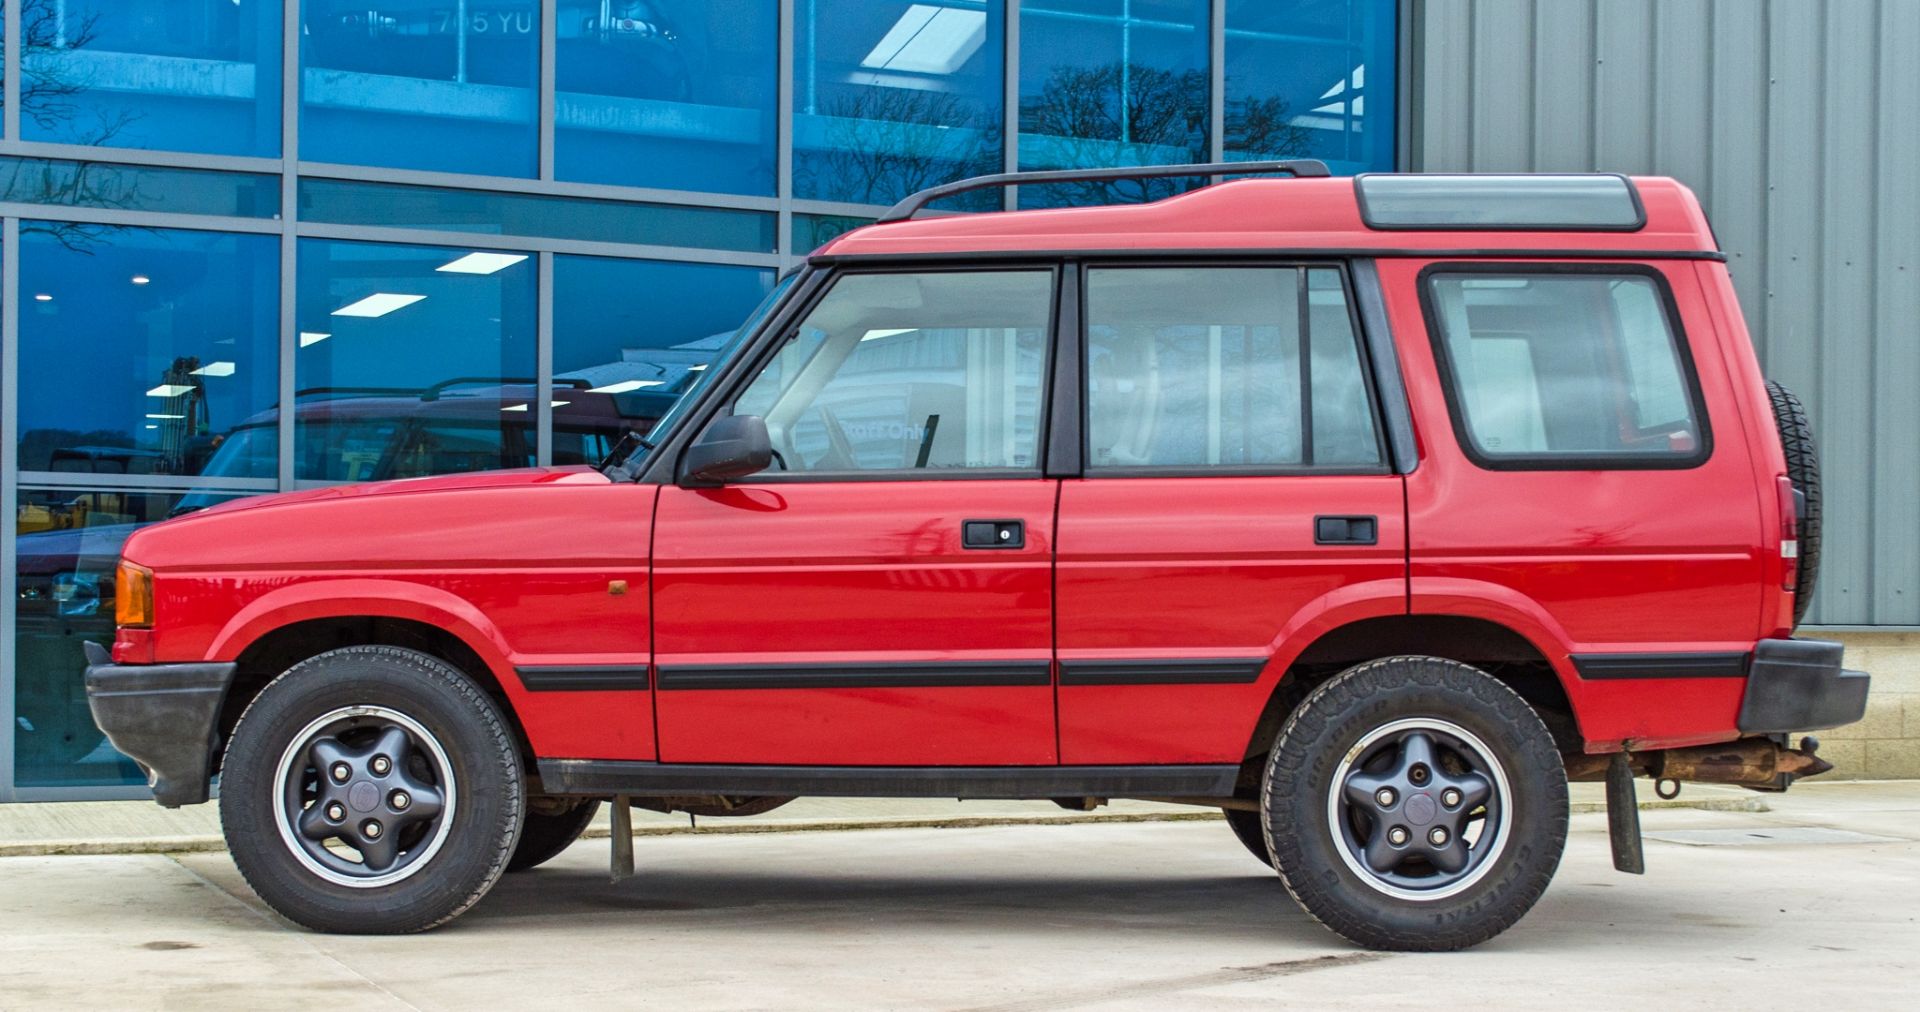 1998 Landrover Discovery 3.9 litre V8 manual 5 door 4wd - Image 15 of 46